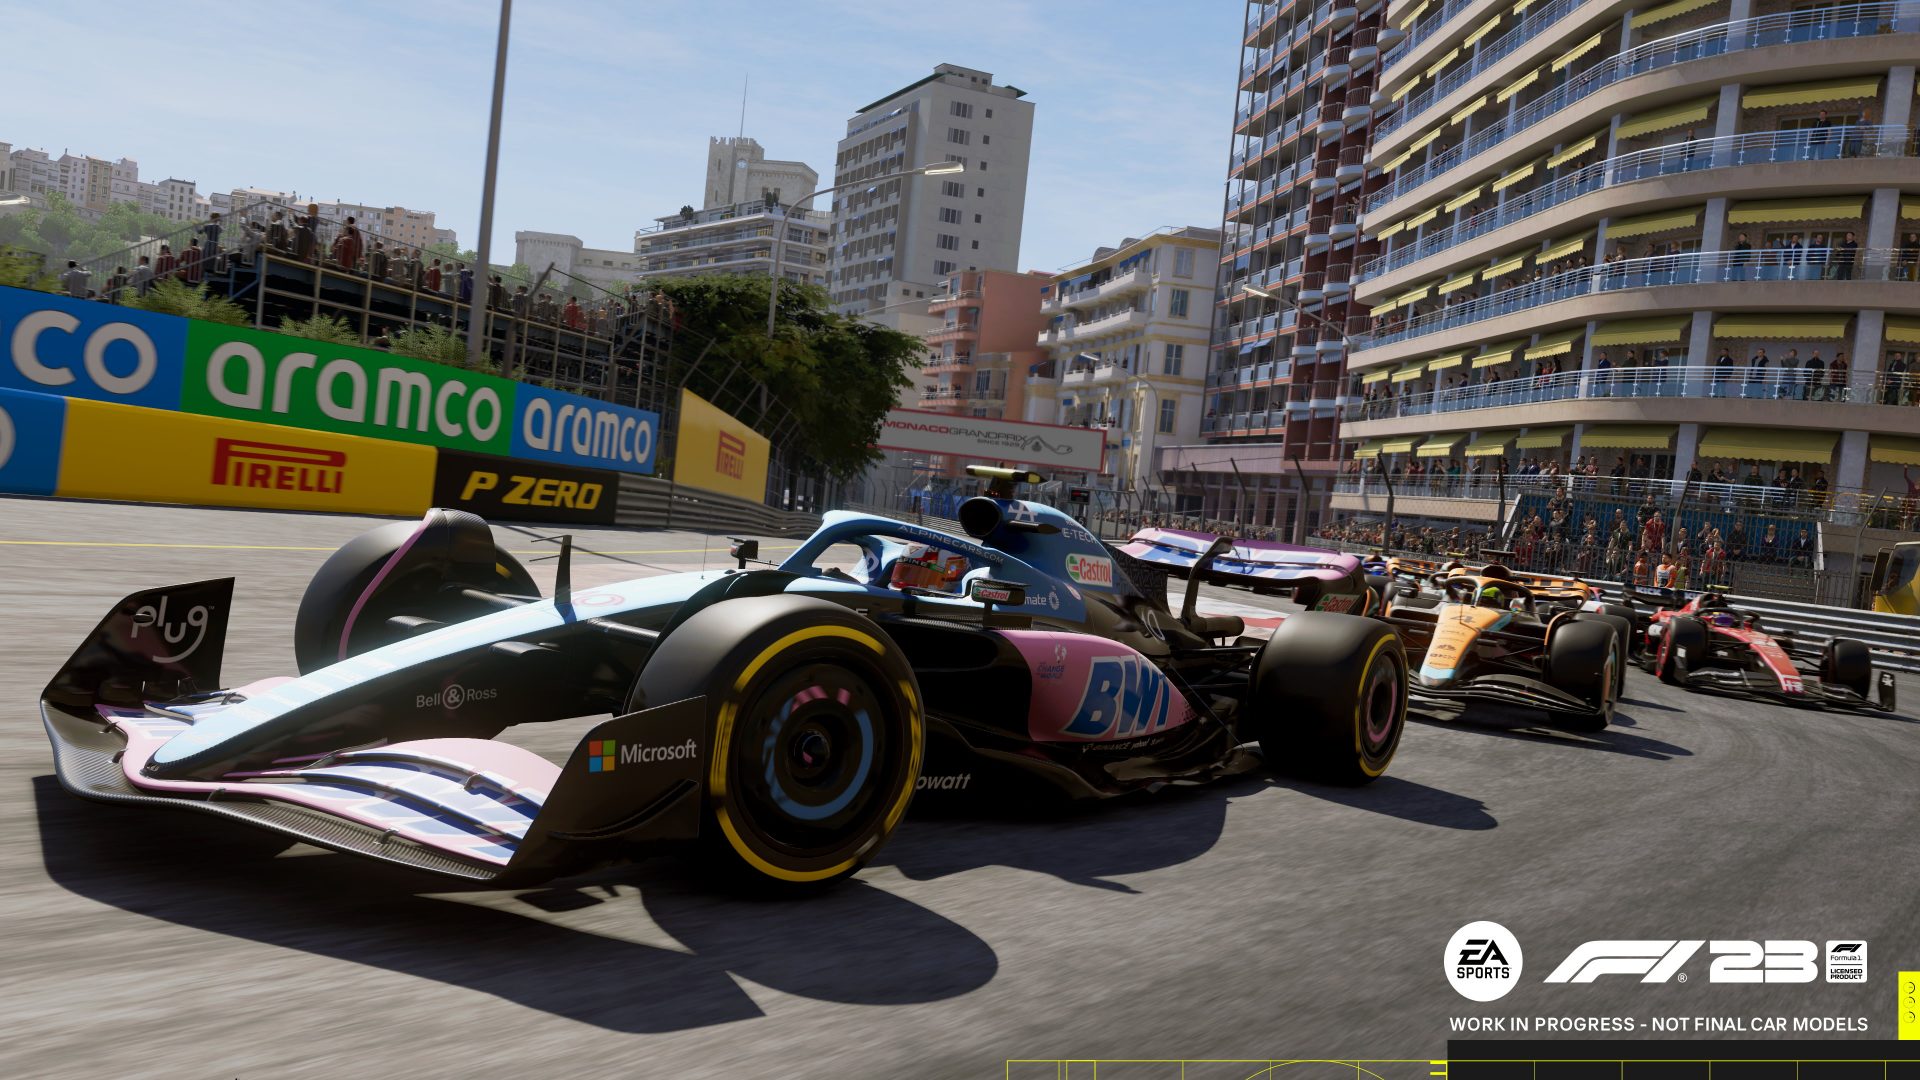 F1 23 trailer confirms June release date and return of story mode Braking  Point | VGC